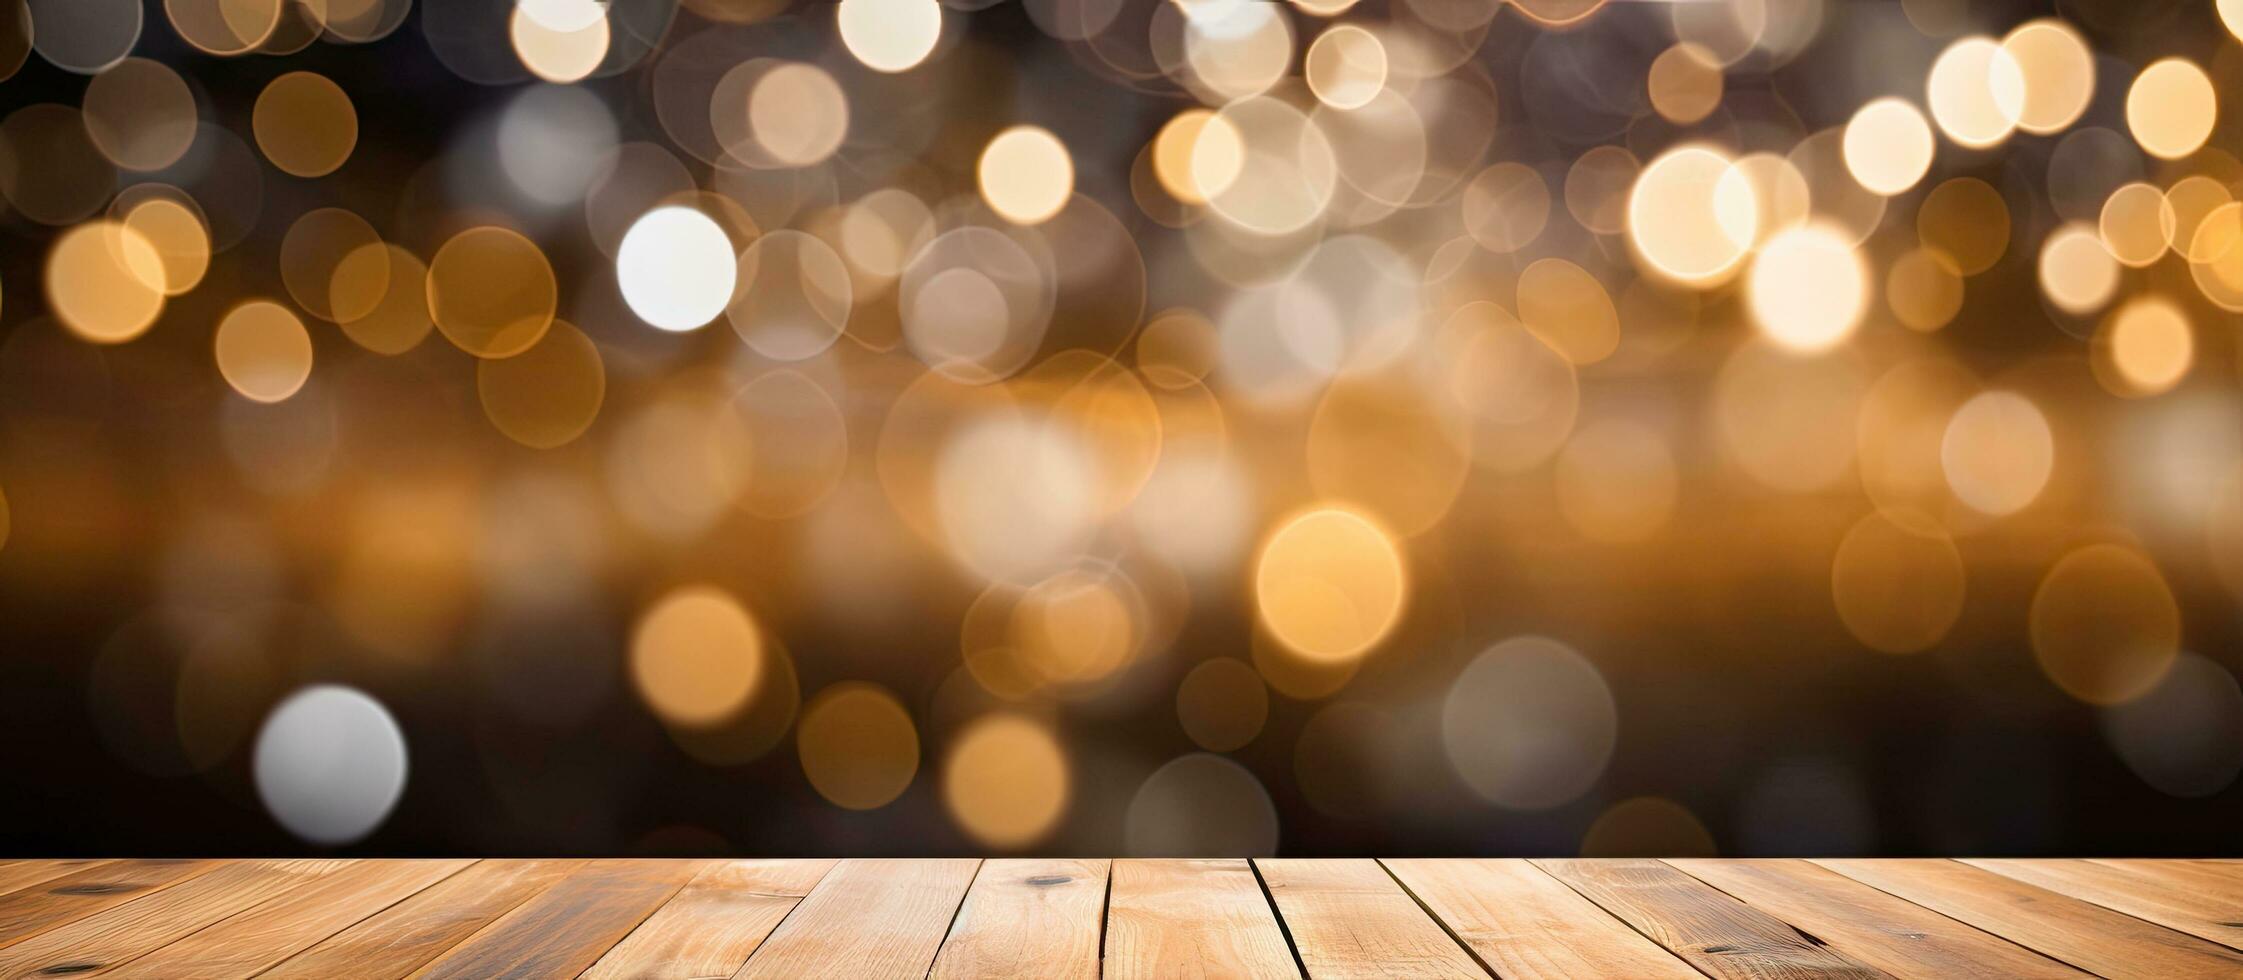 Blurred bokeh or store background seen through a wooden tabletop photo